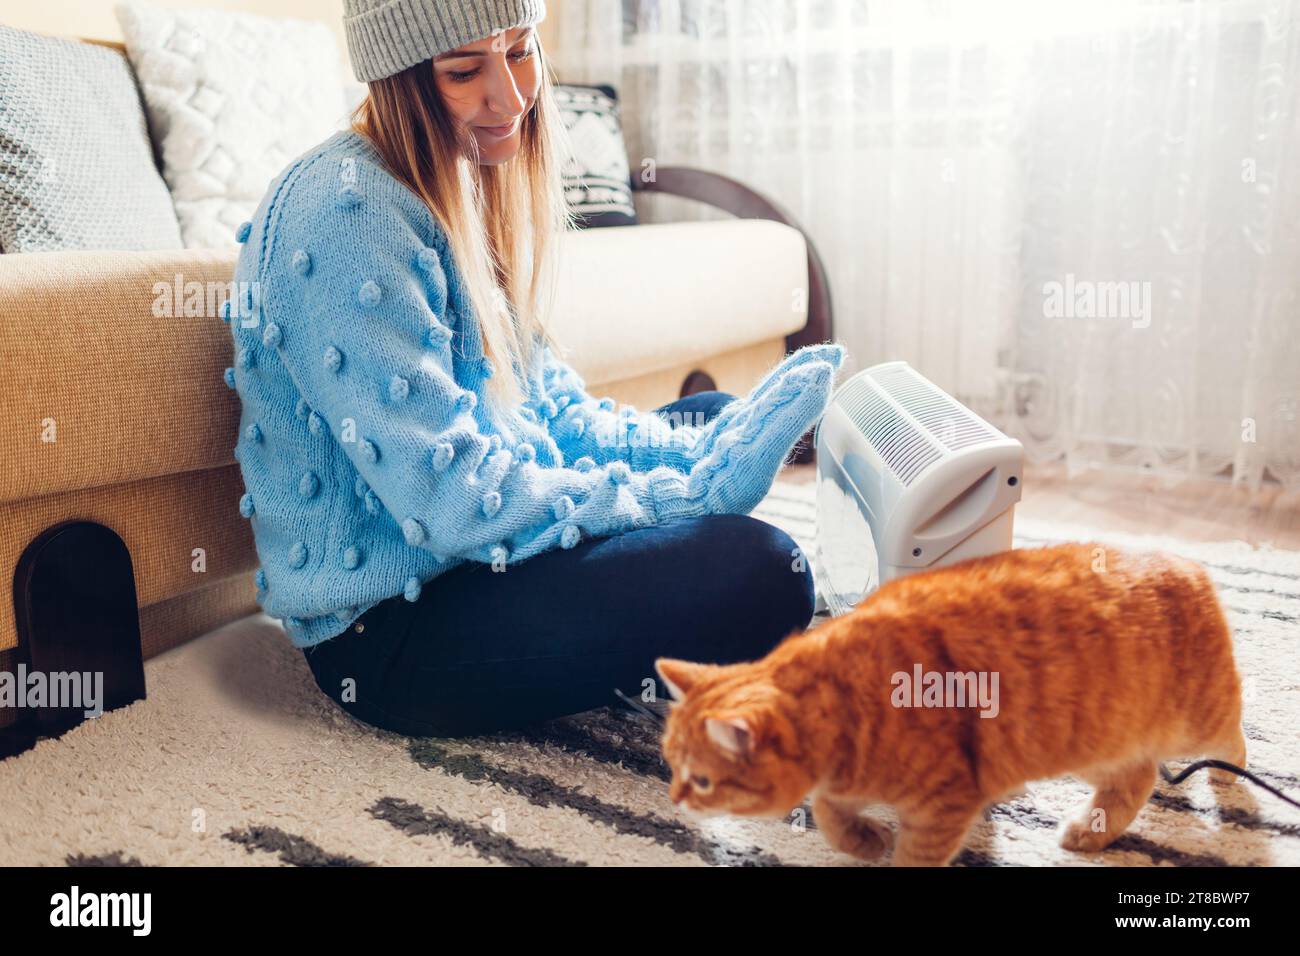 Using heater at home in winter. Woman warming her hands with cat wearing sweater. Heating season. Stock Photo